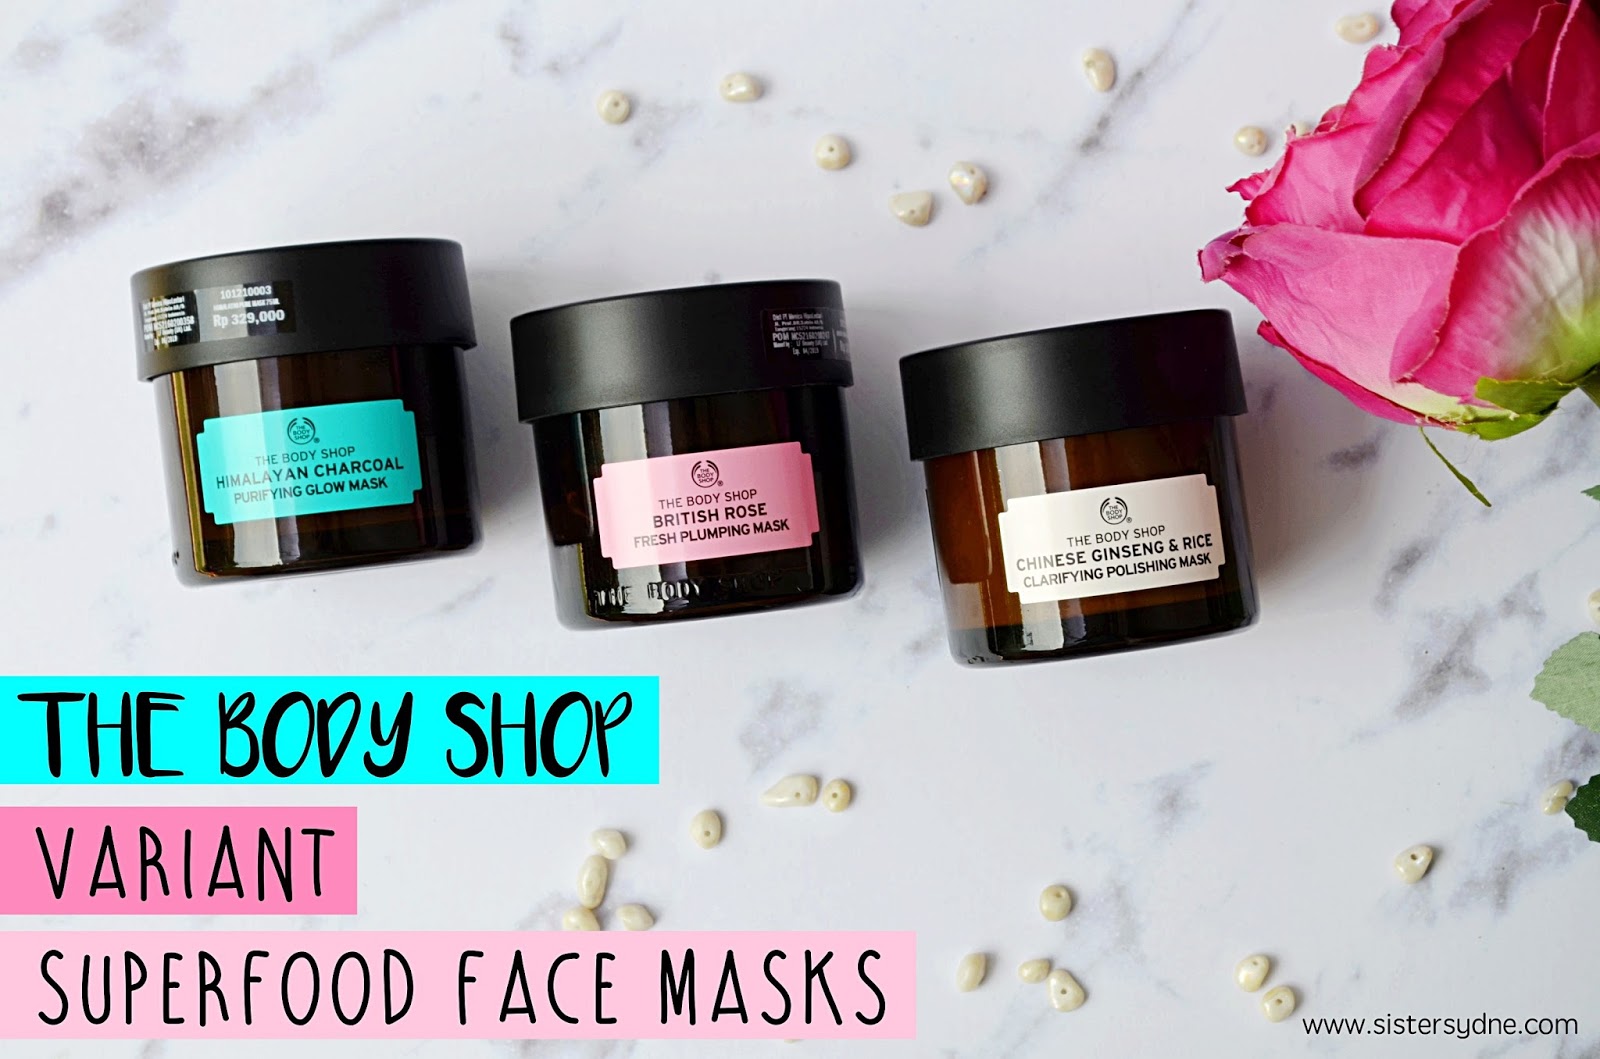 DA Sisters Blog Review The Body Shop Superfood Face Mask